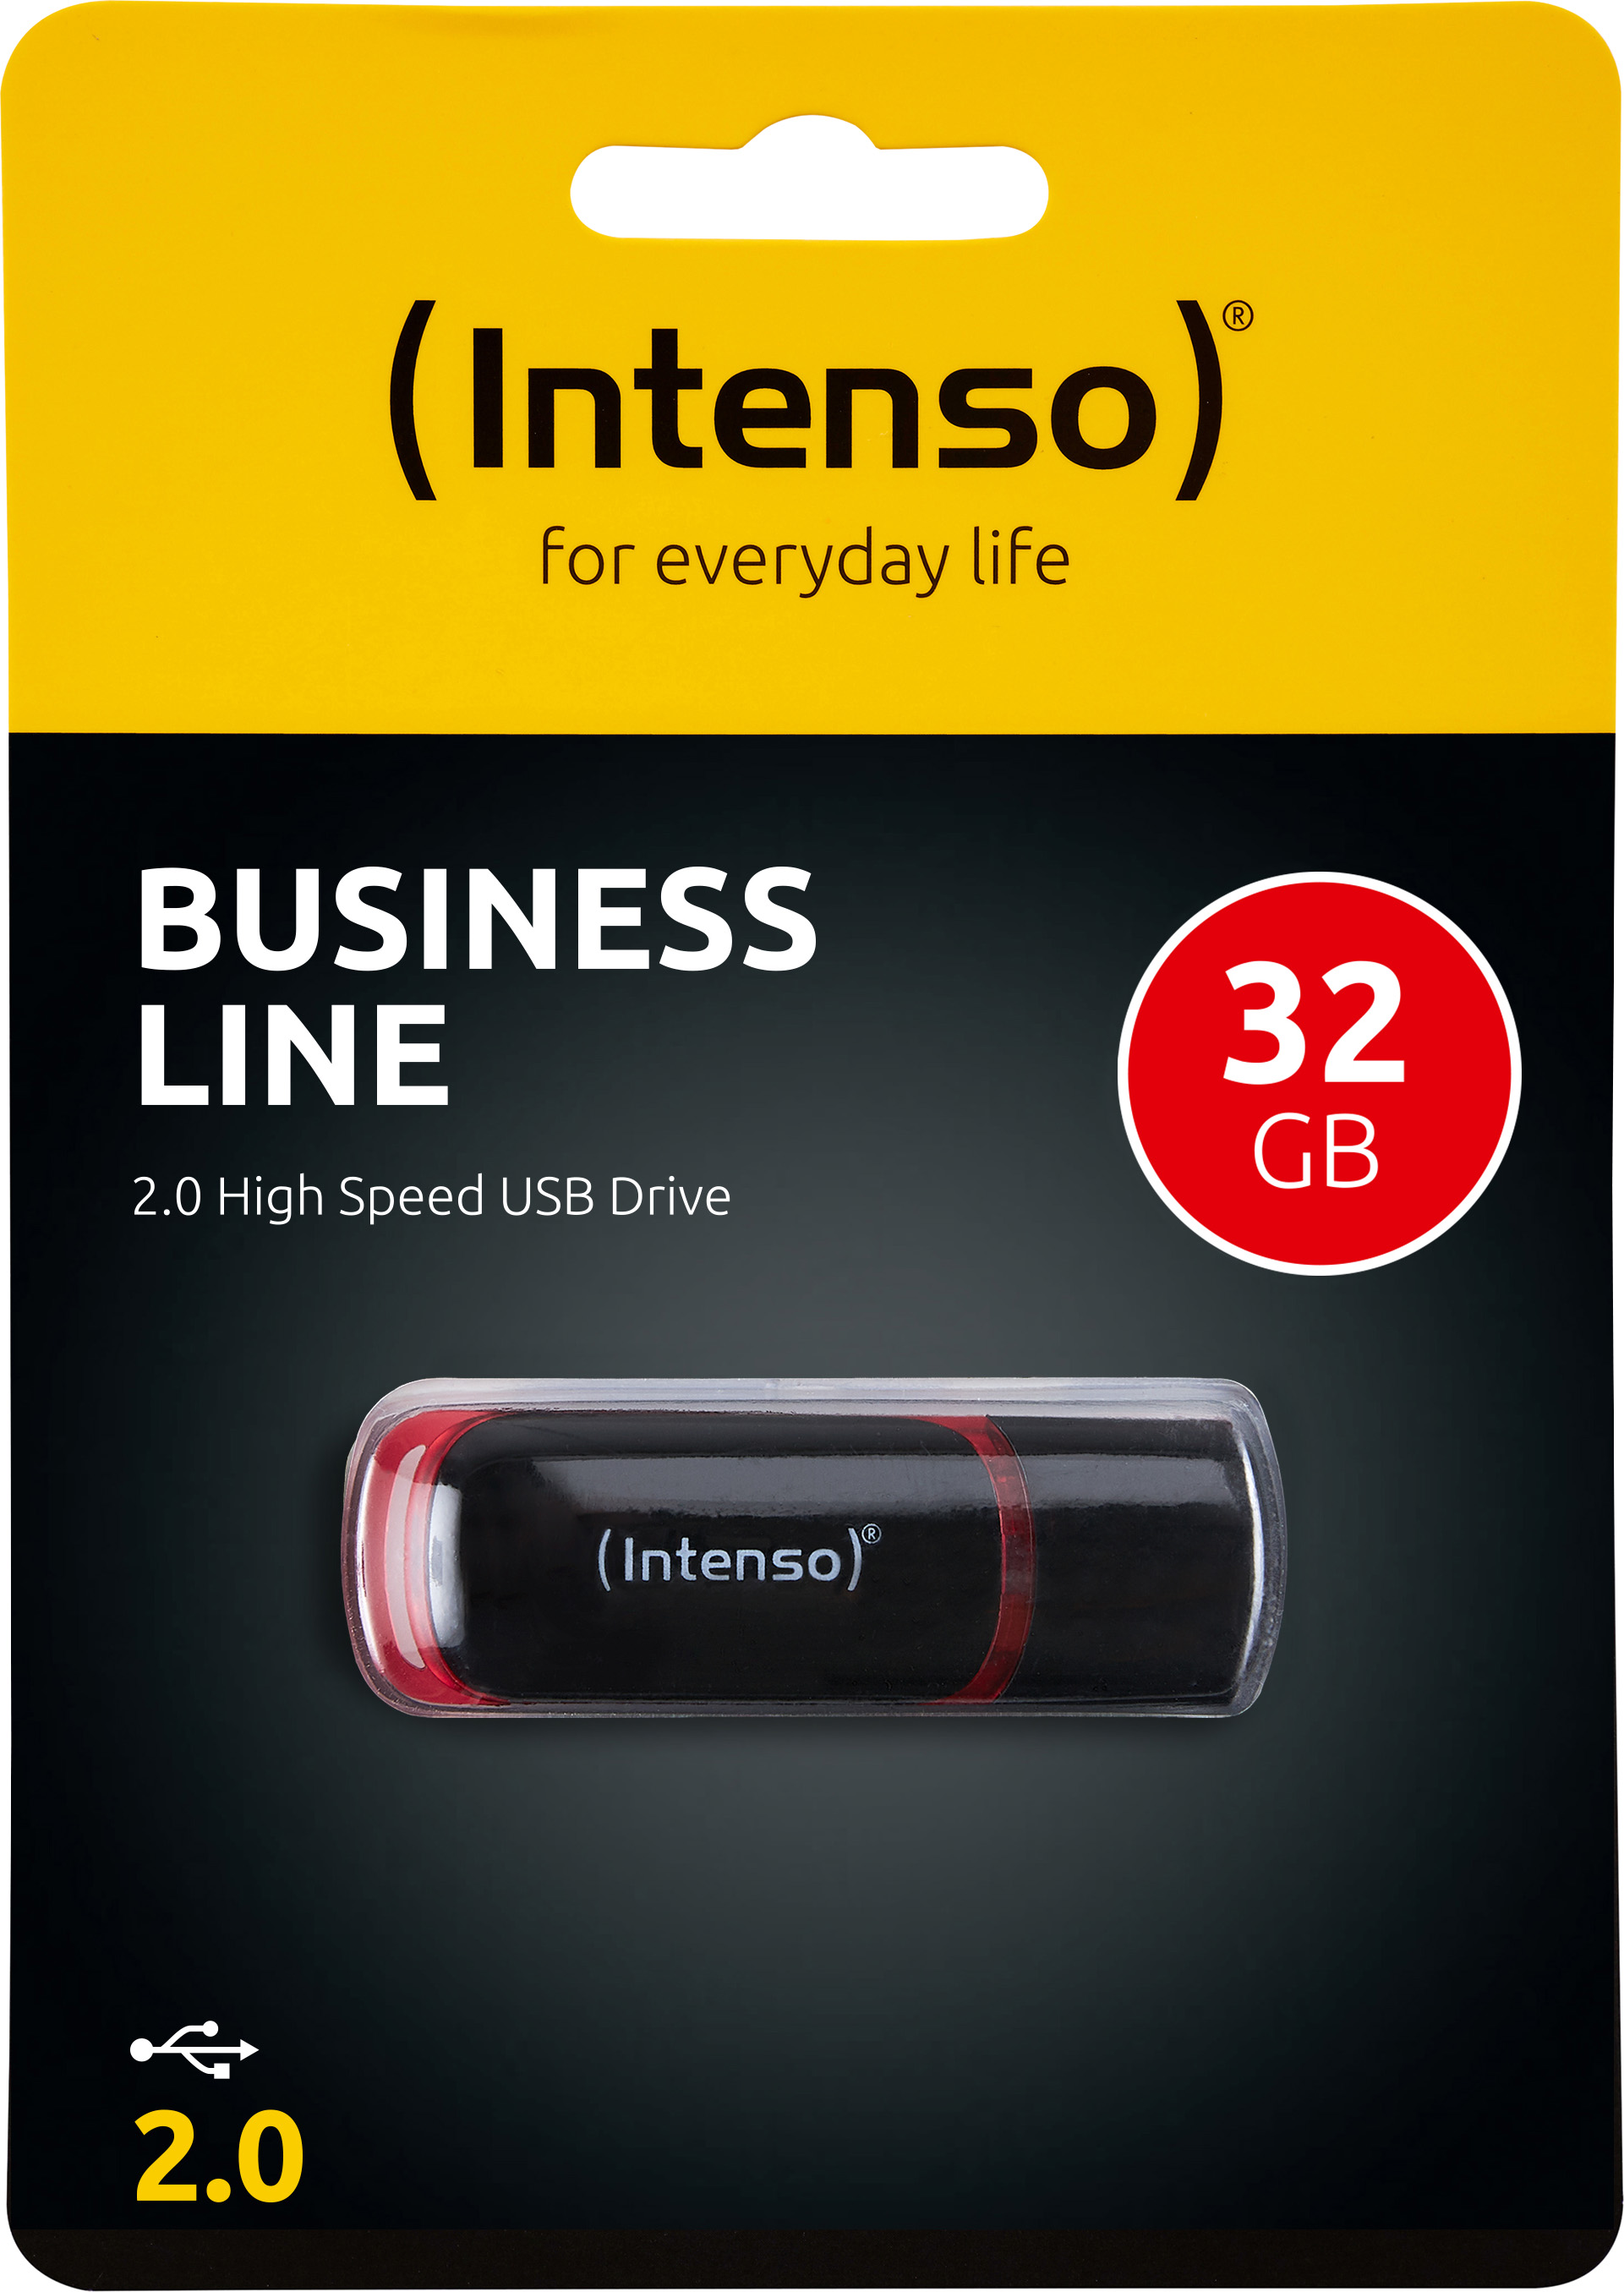 Intenso USB 2.0 Stick 32GB, Business Line, schwarz (R) 28MB/s, (W) 6.5MB/s, Rectractable, Retail-Blister